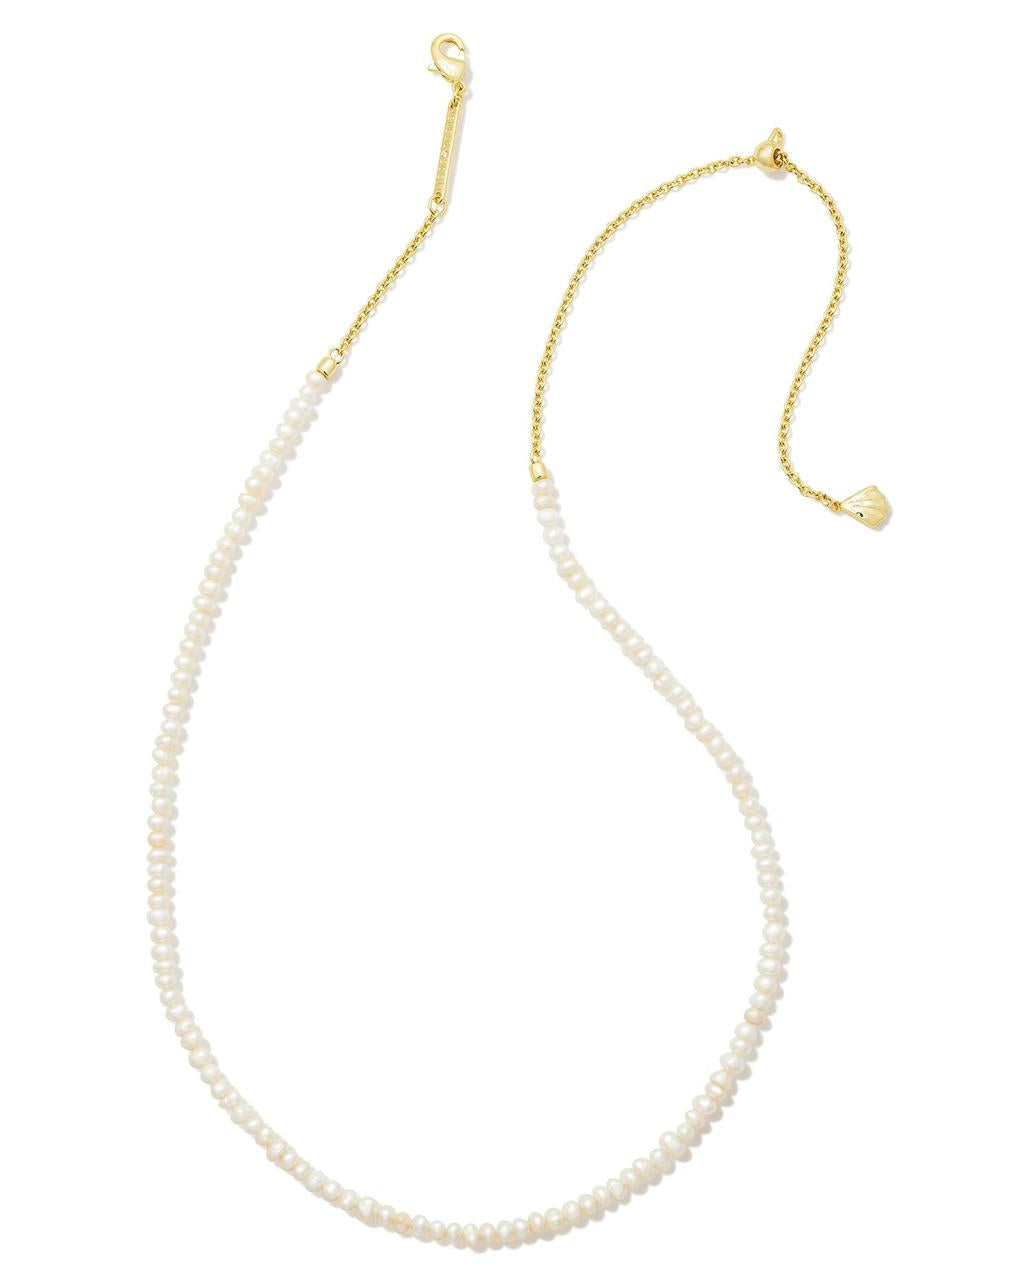 LOLO STRAND NECKLACE GOLD WHITE PEARL